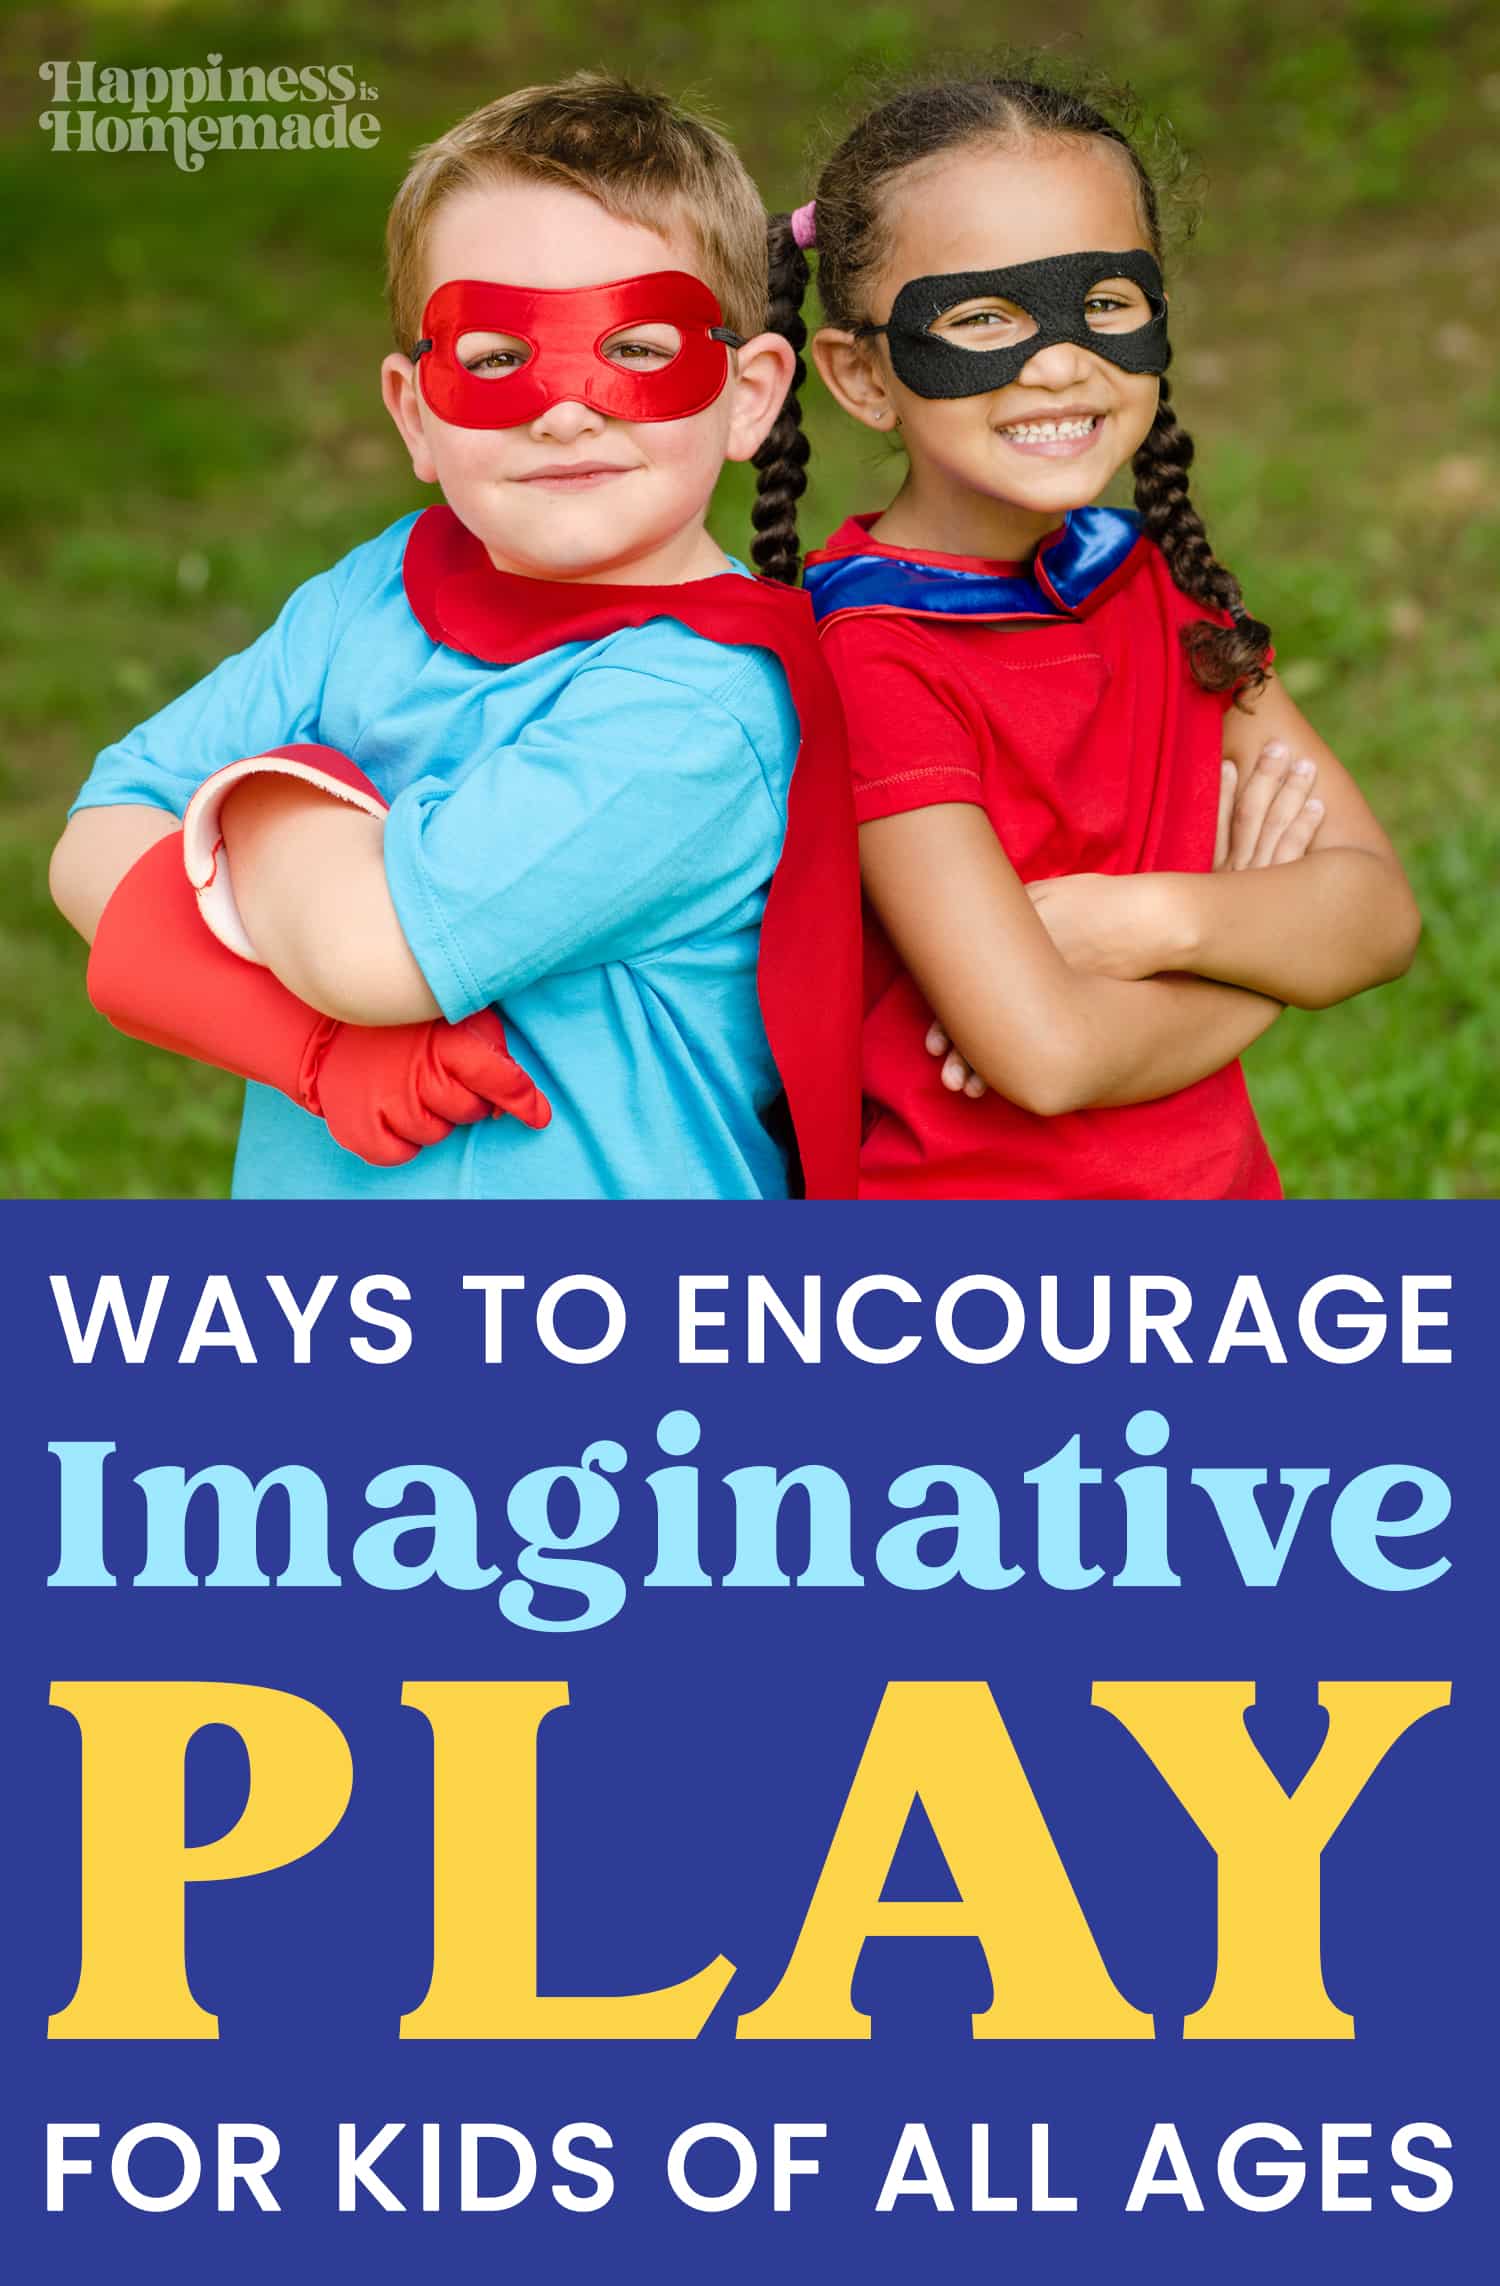 "Ways to Encourage Imaginative Play in Children" graphic with two superhero children in dress up